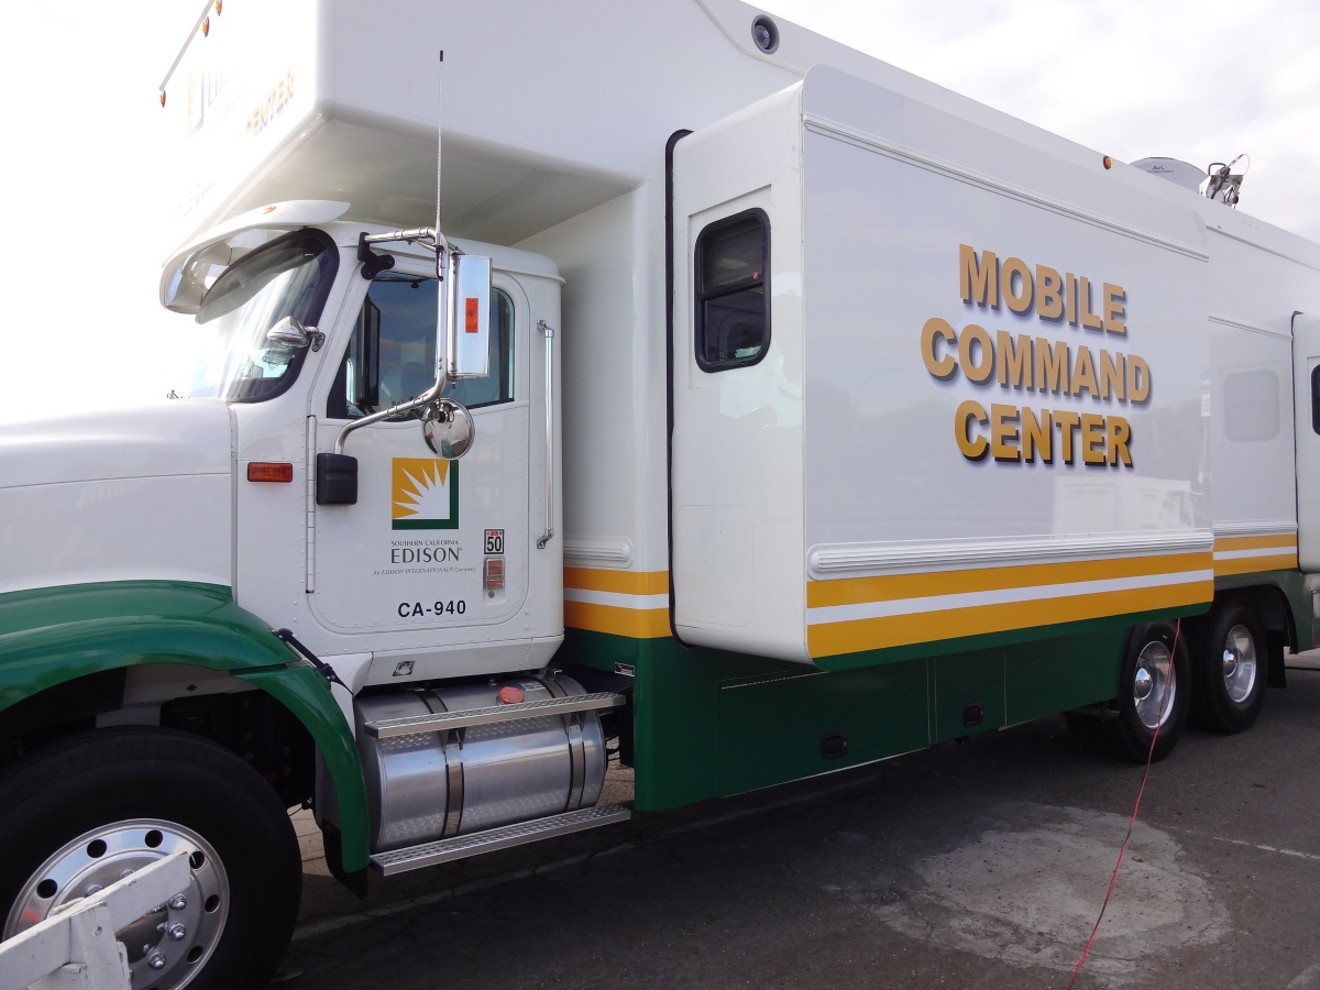 A mobile command center similar to the one commissioned by the Coral Gables Police Department.